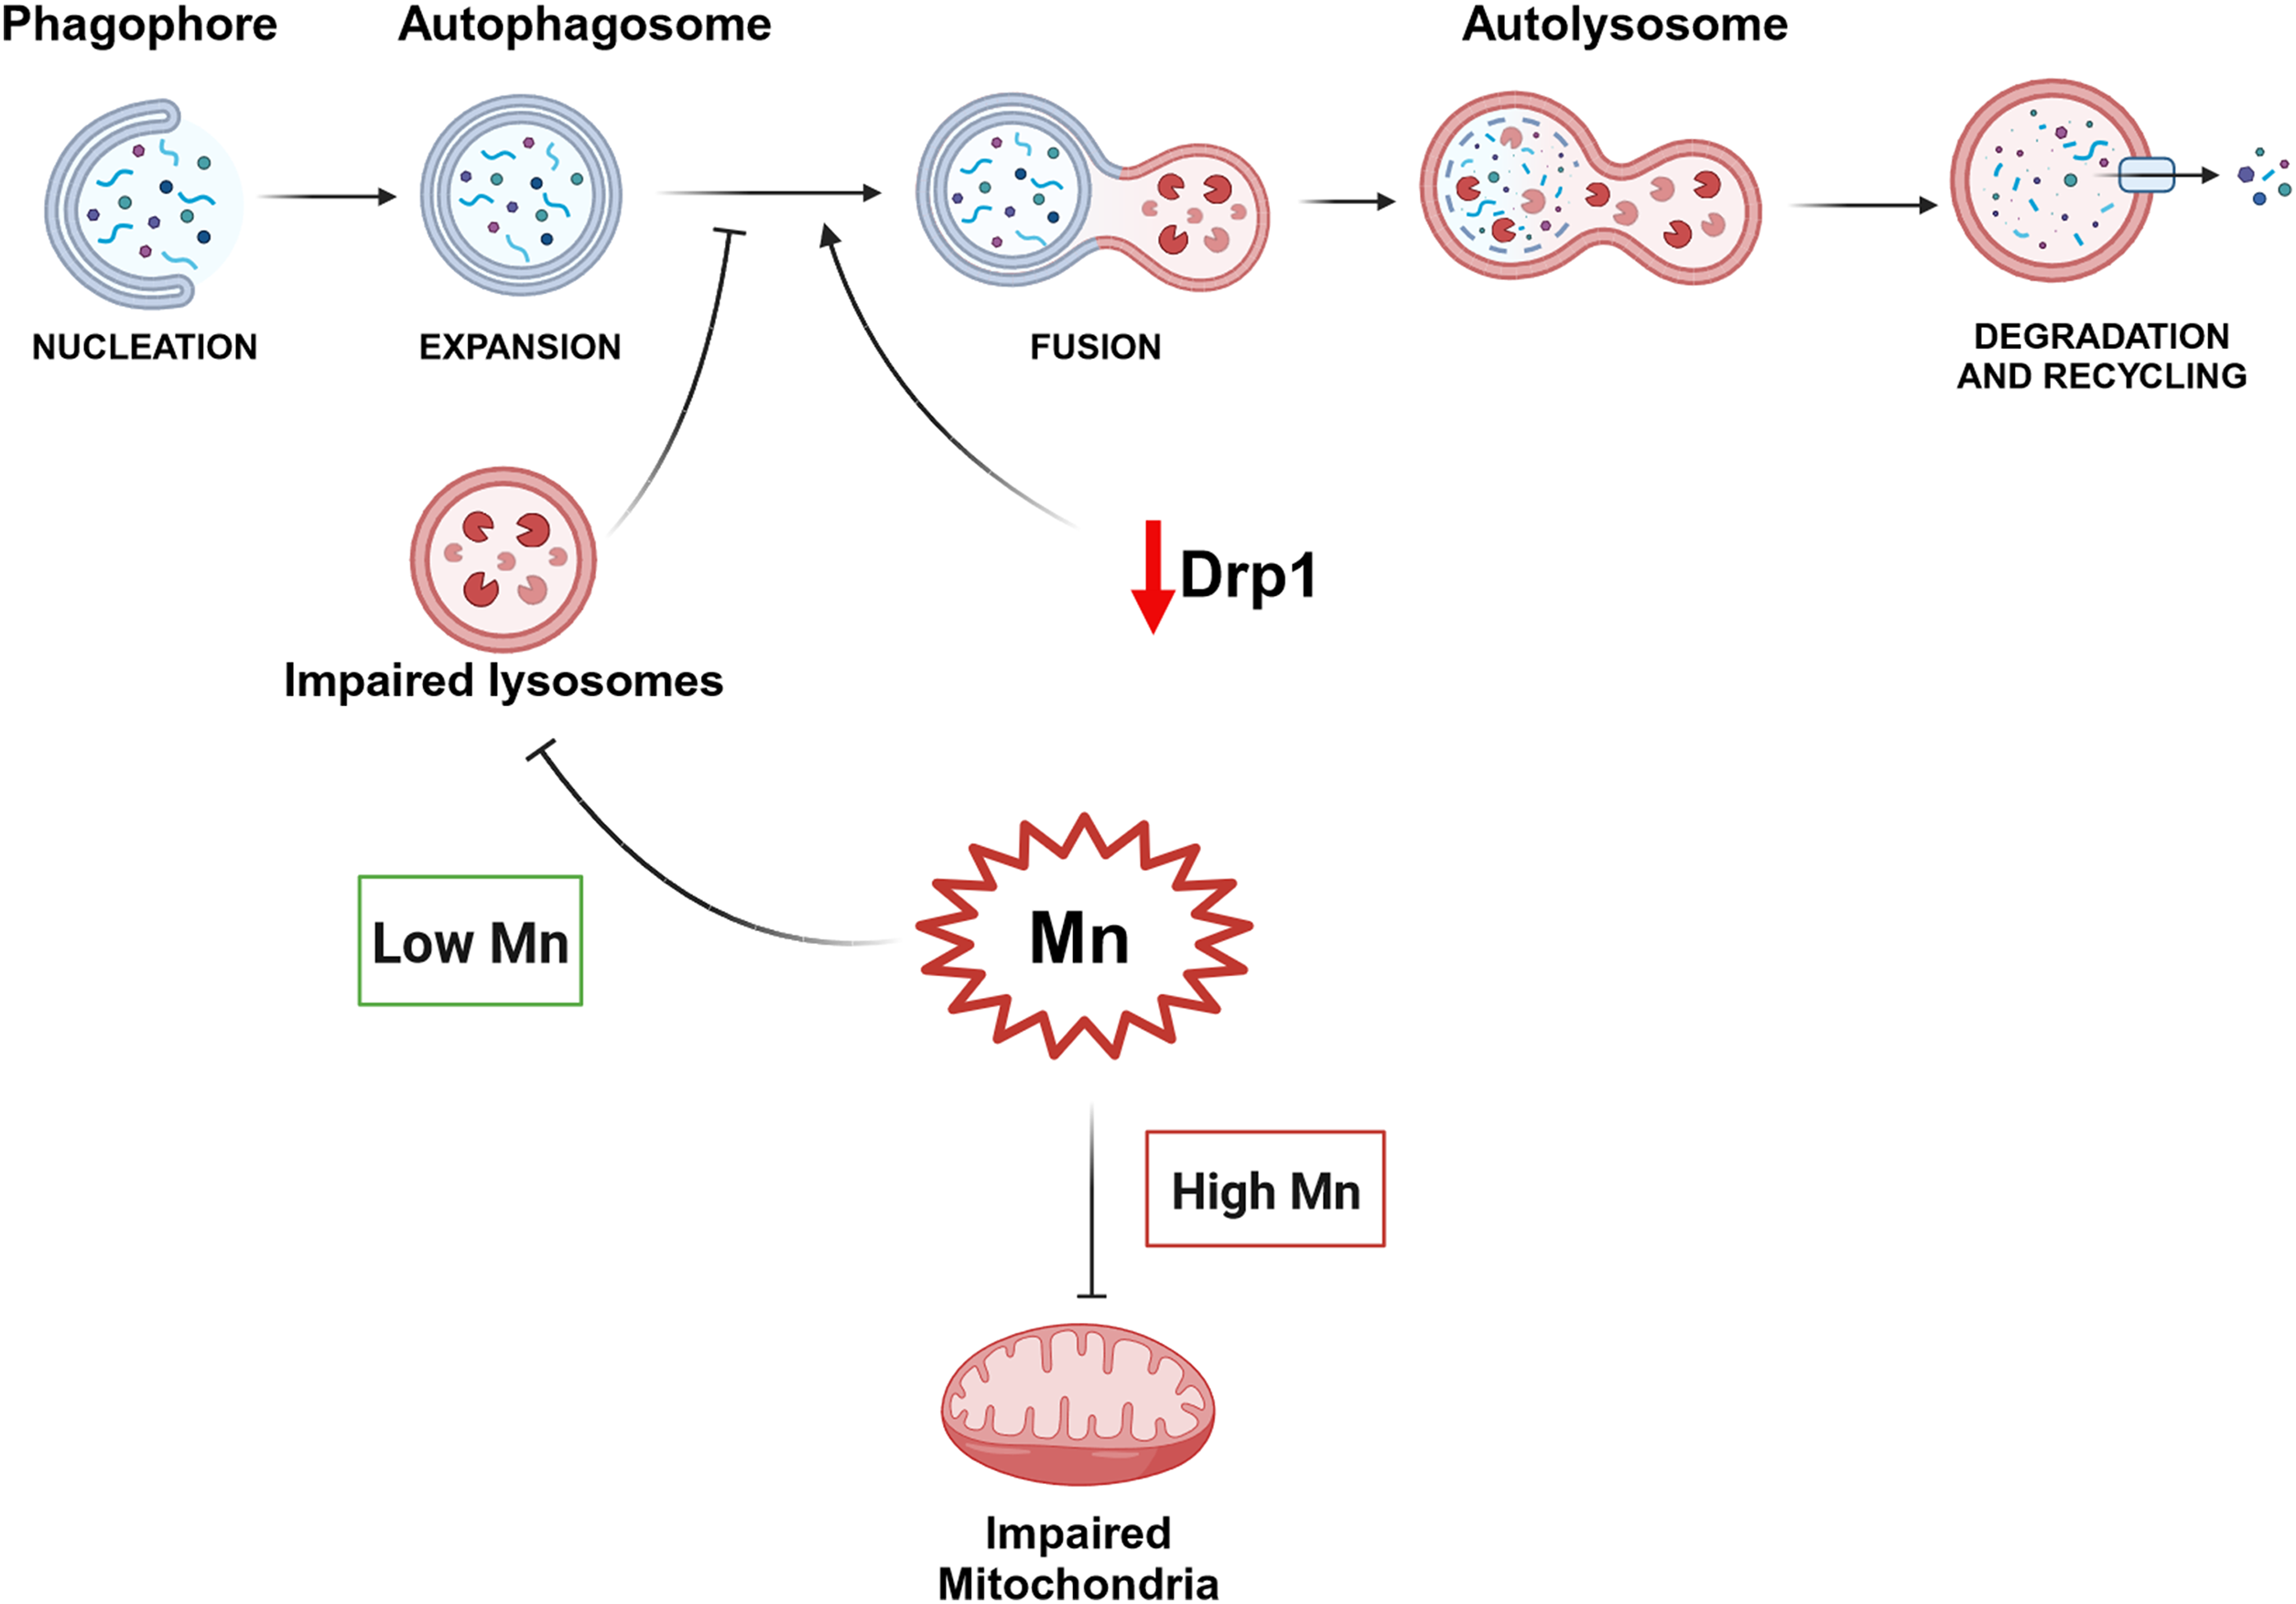 A partial Drp1 knockout improves autophagy flux independent of mitochondrial function